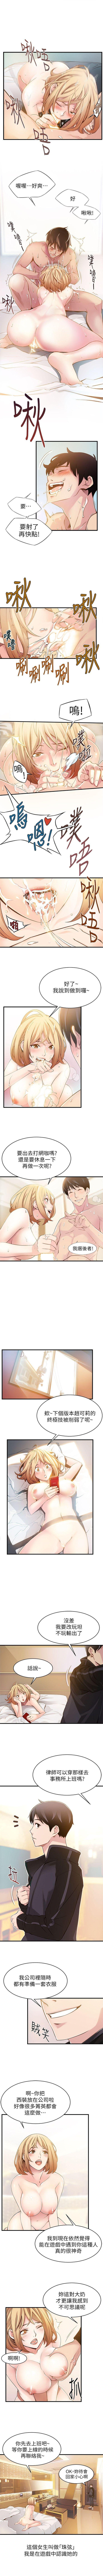 Spreading 弱點 1-101 官方中文（連載中） Action - Page 3